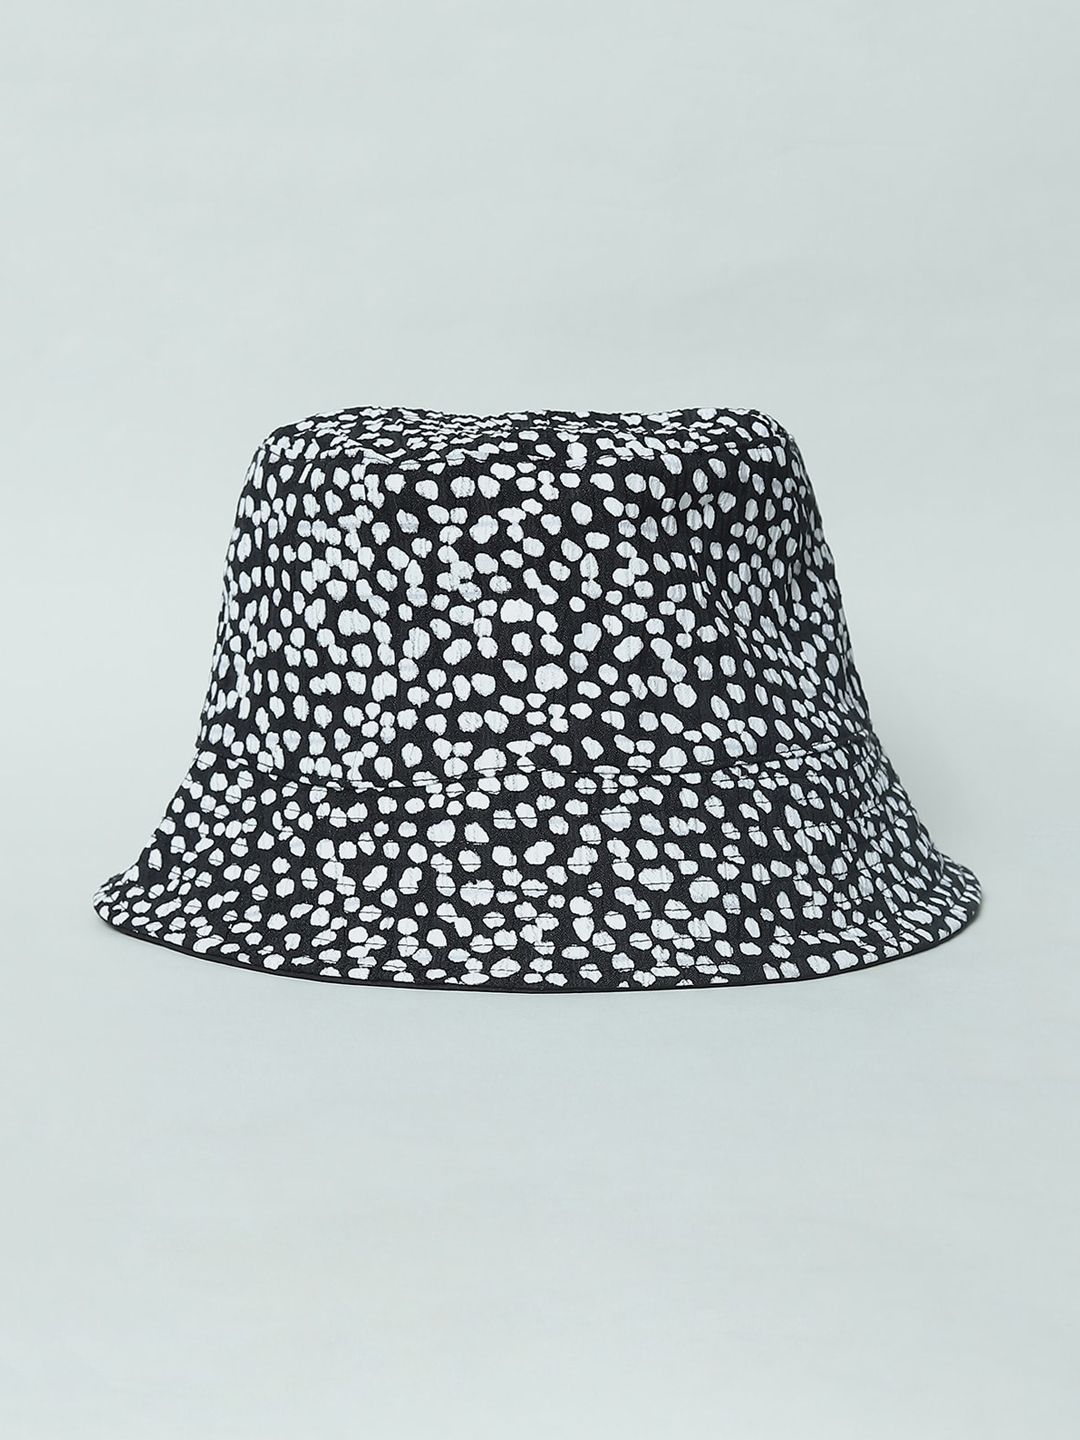 ONLY Women Black & White Printed Bucket Hat Price in India